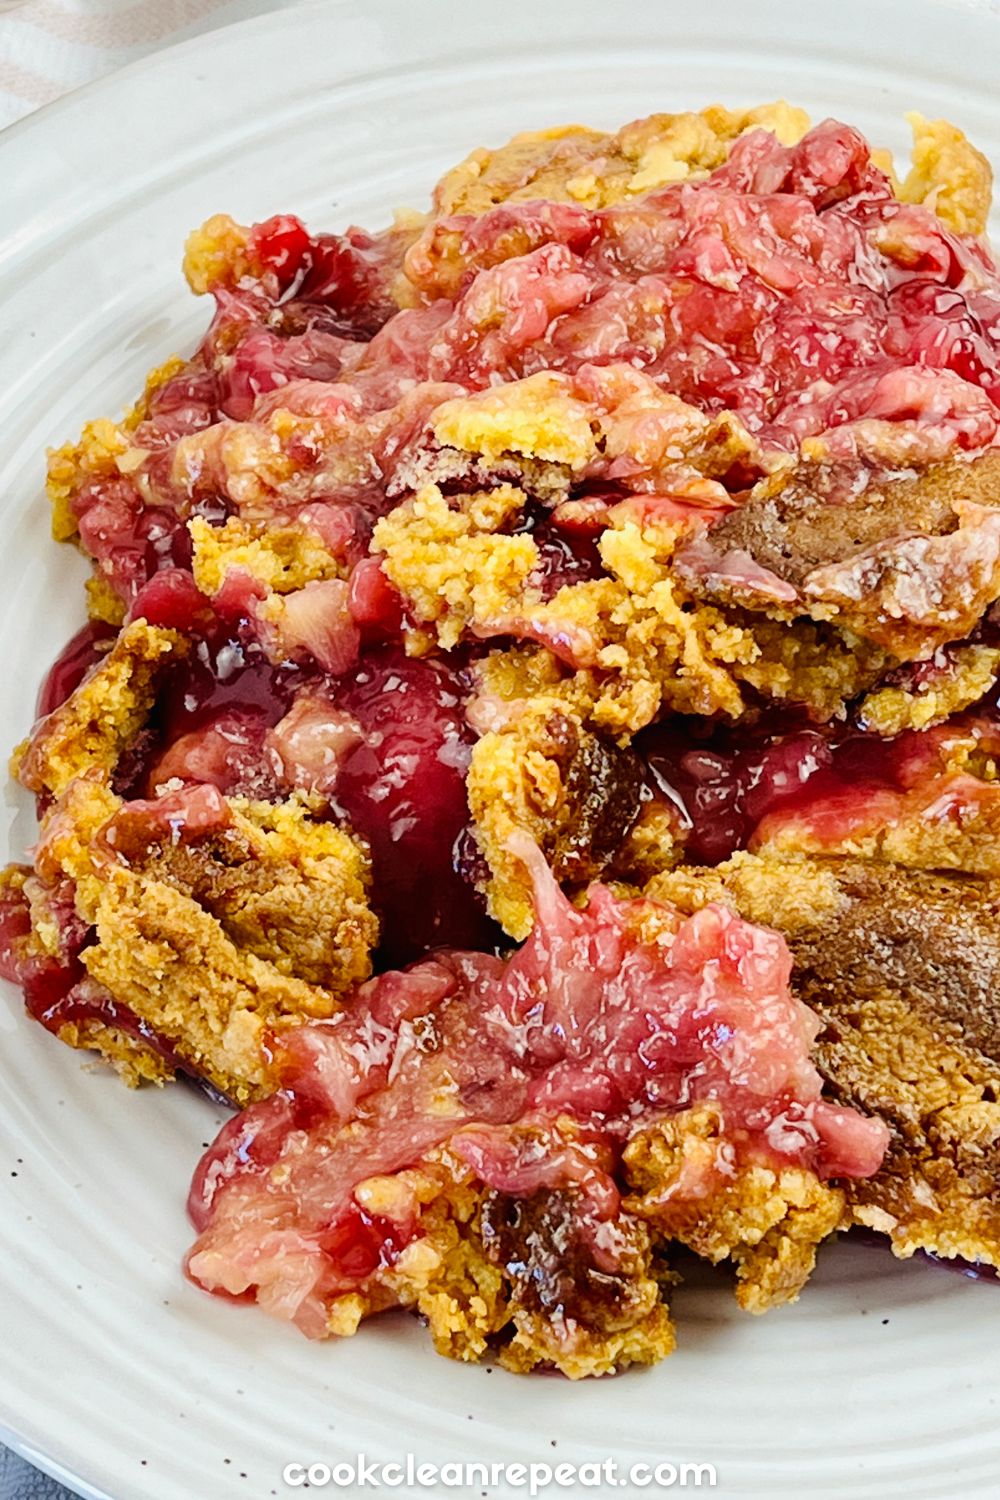 a serving of Cherry Pineapple Dump Cake on a plate showing the texture